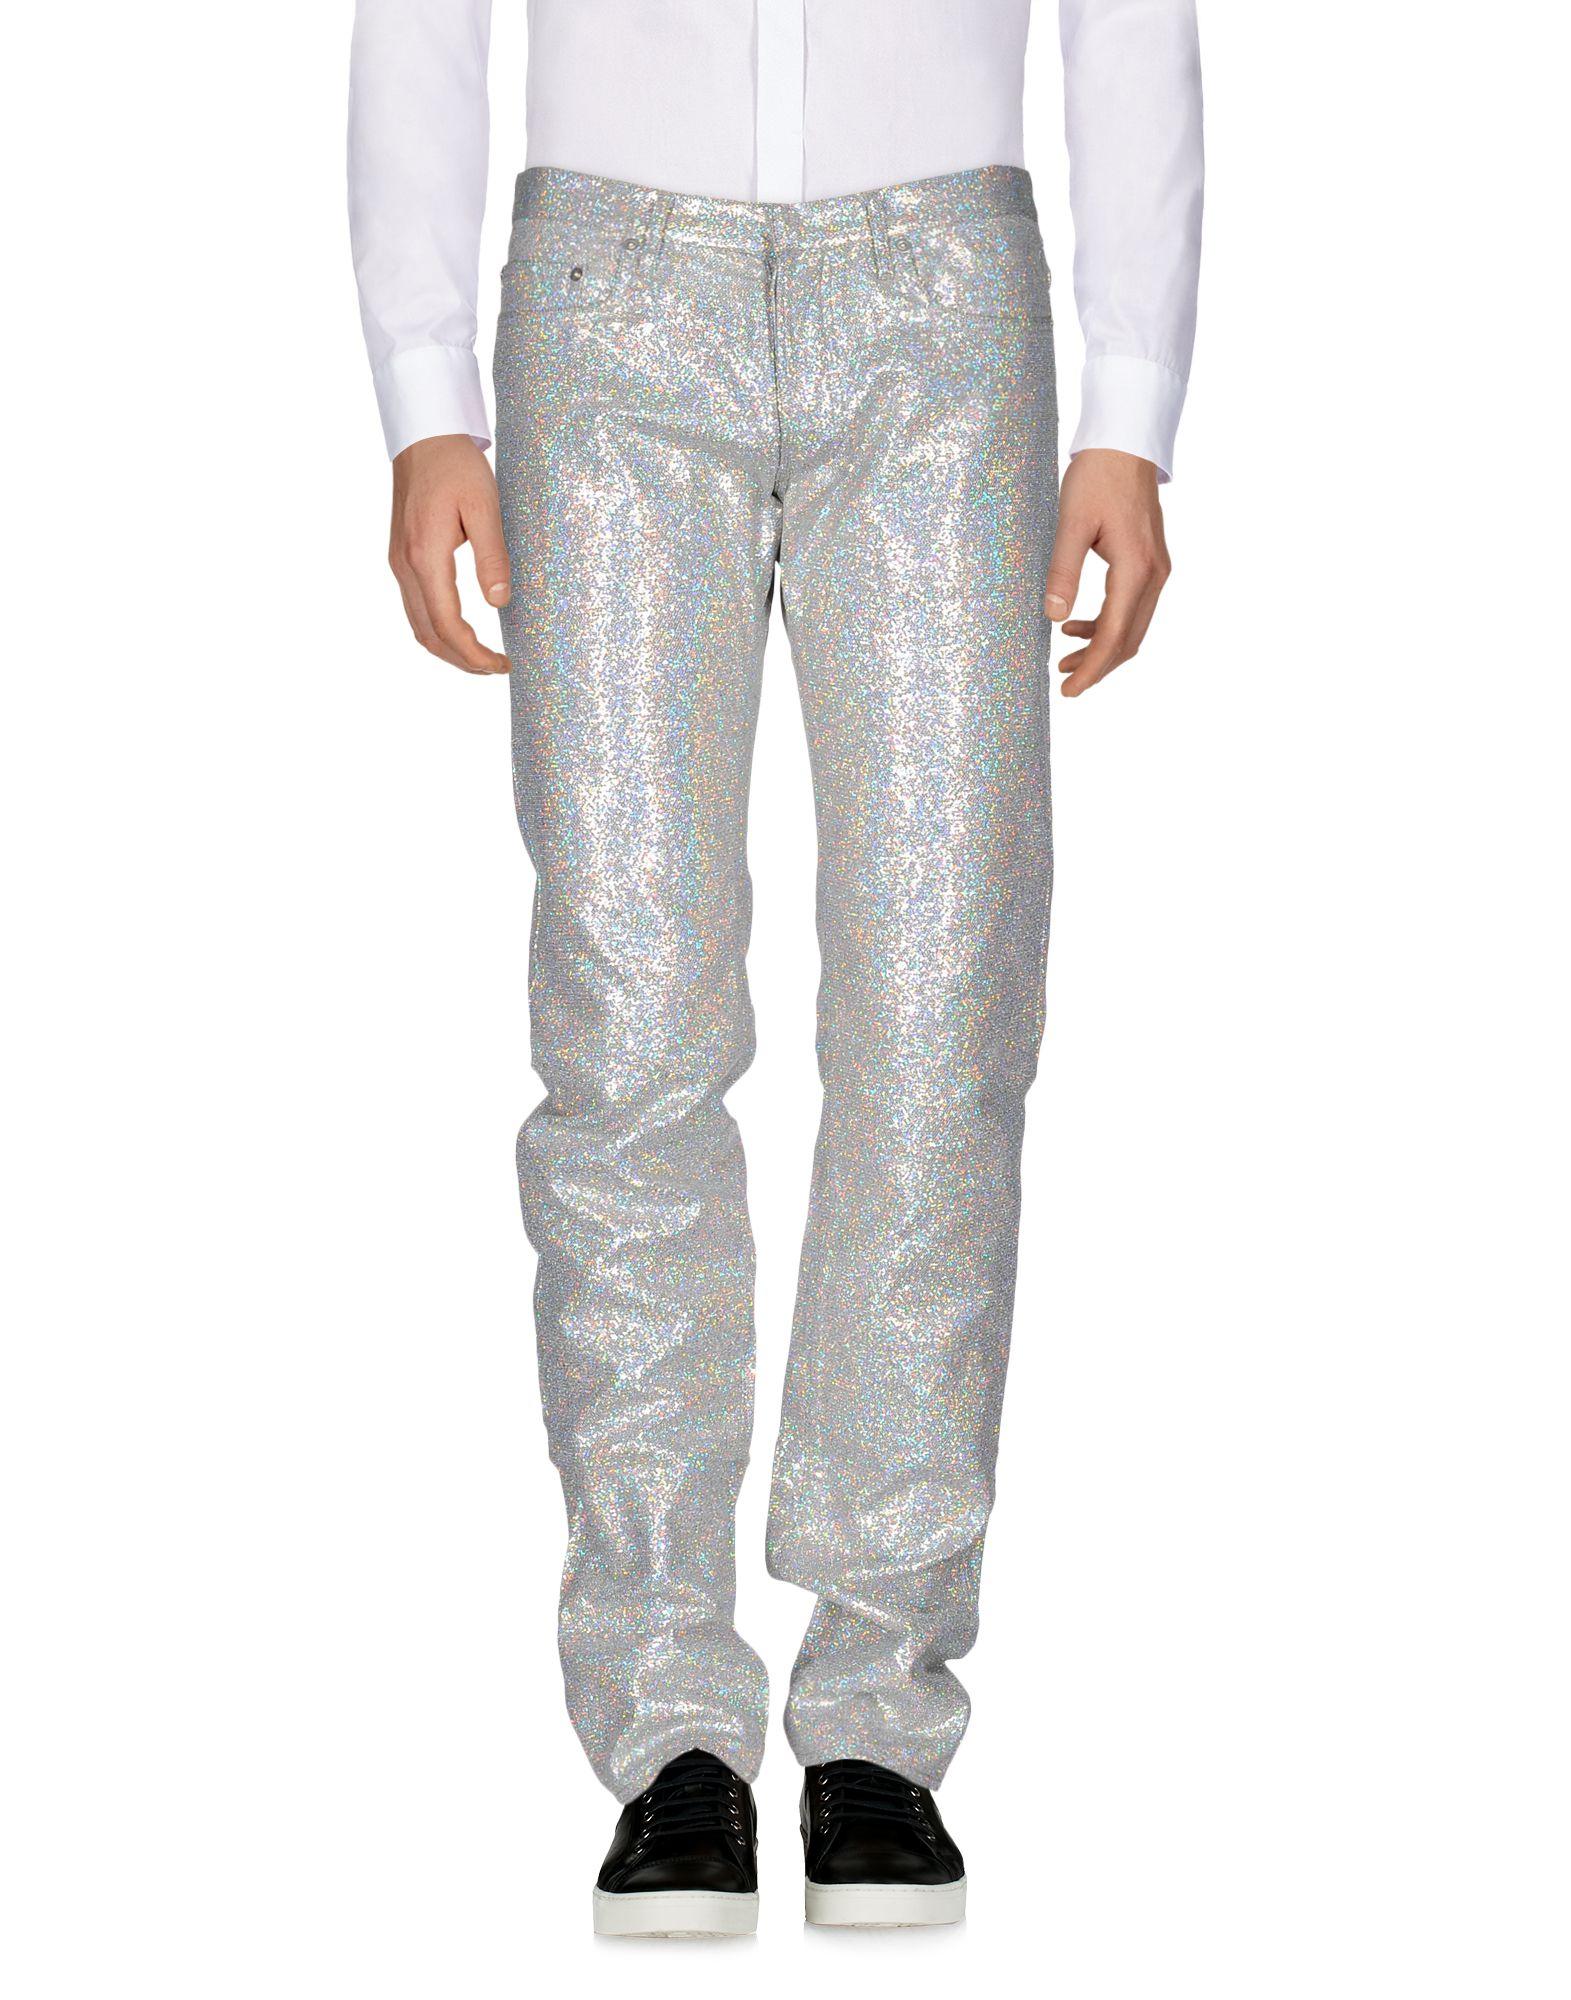 Lyst - Dior Homme Casual Pants in Metallic for Men